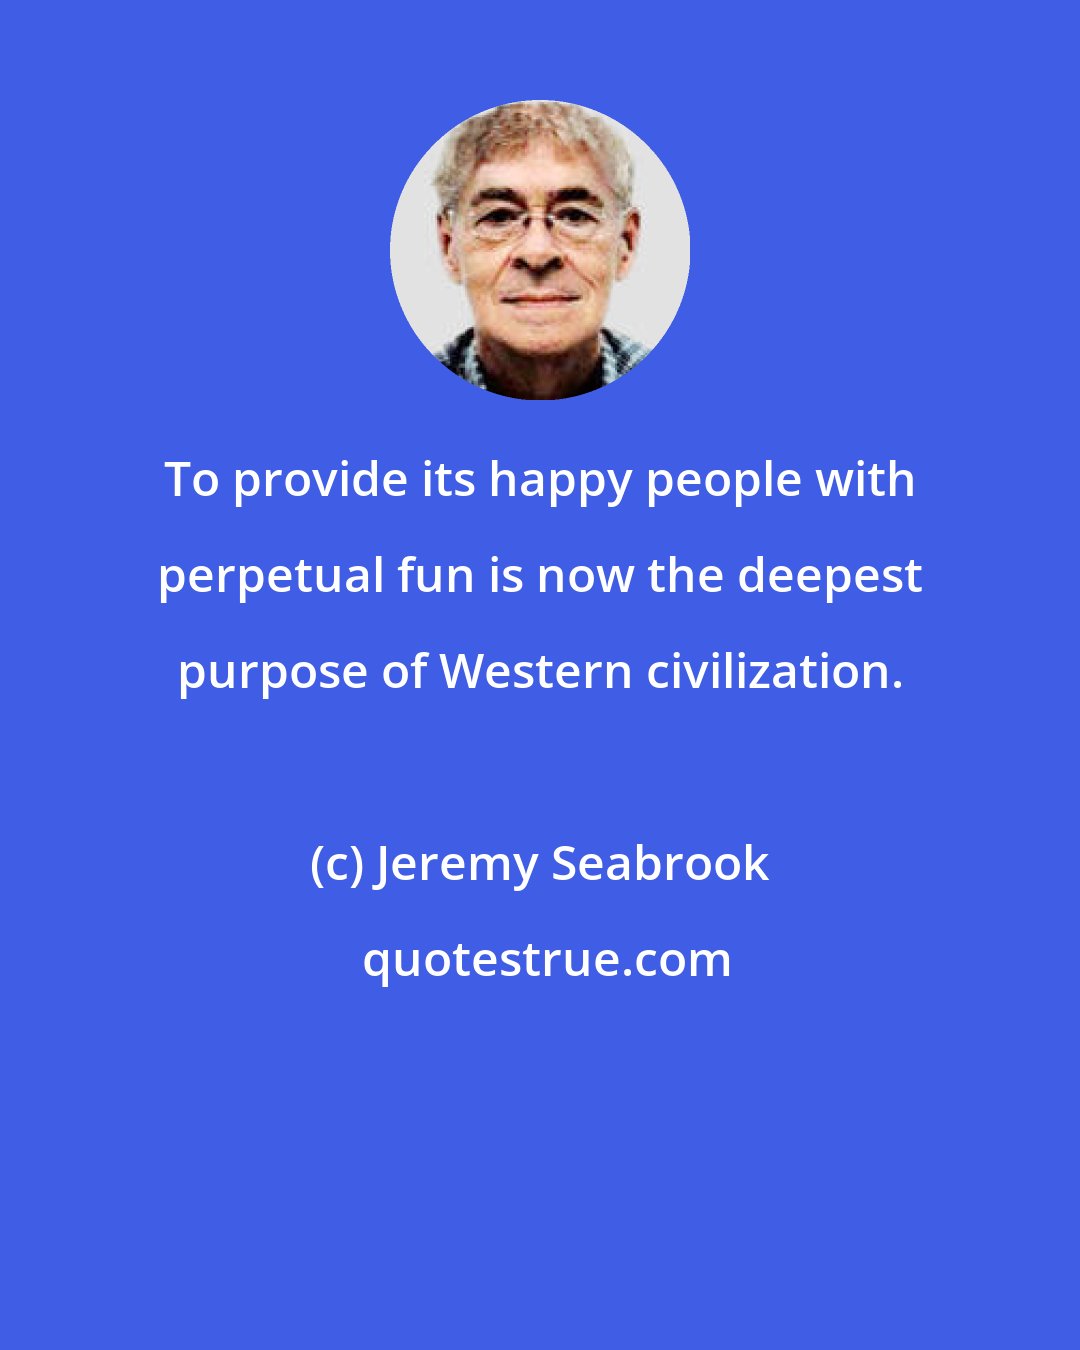 Jeremy Seabrook: To provide its happy people with perpetual fun is now the deepest purpose of Western civilization.